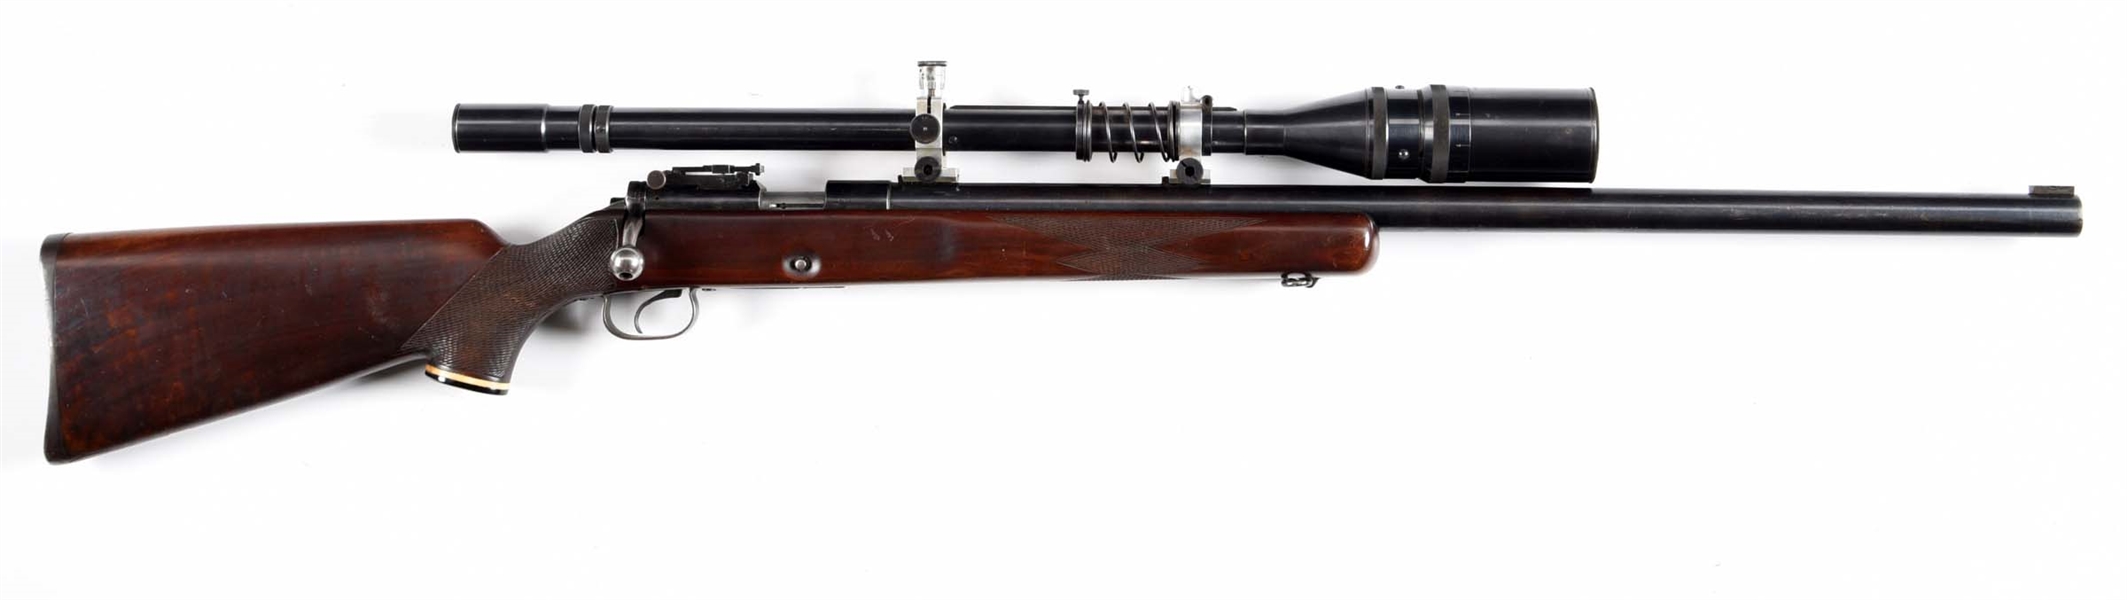 (C) WINCHESTER MODEL 52 TARGET RIFLE WITH UNERTL SCOPE.